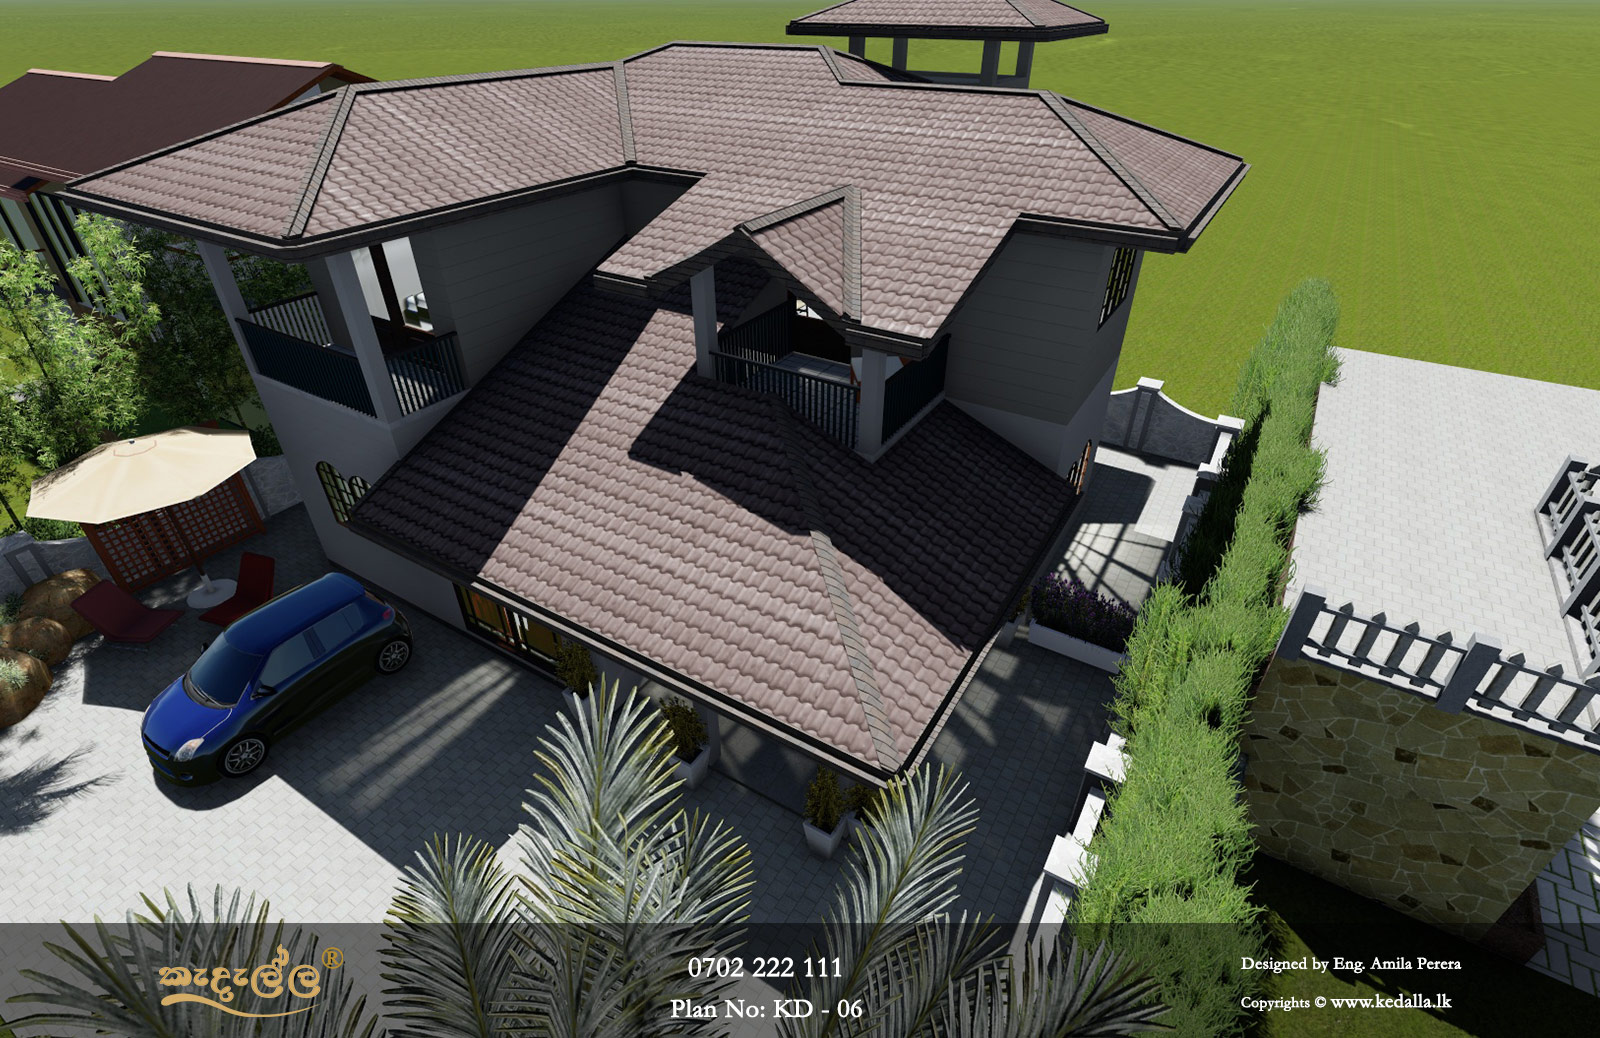 Different house designs plans pictures, house designs with prices 